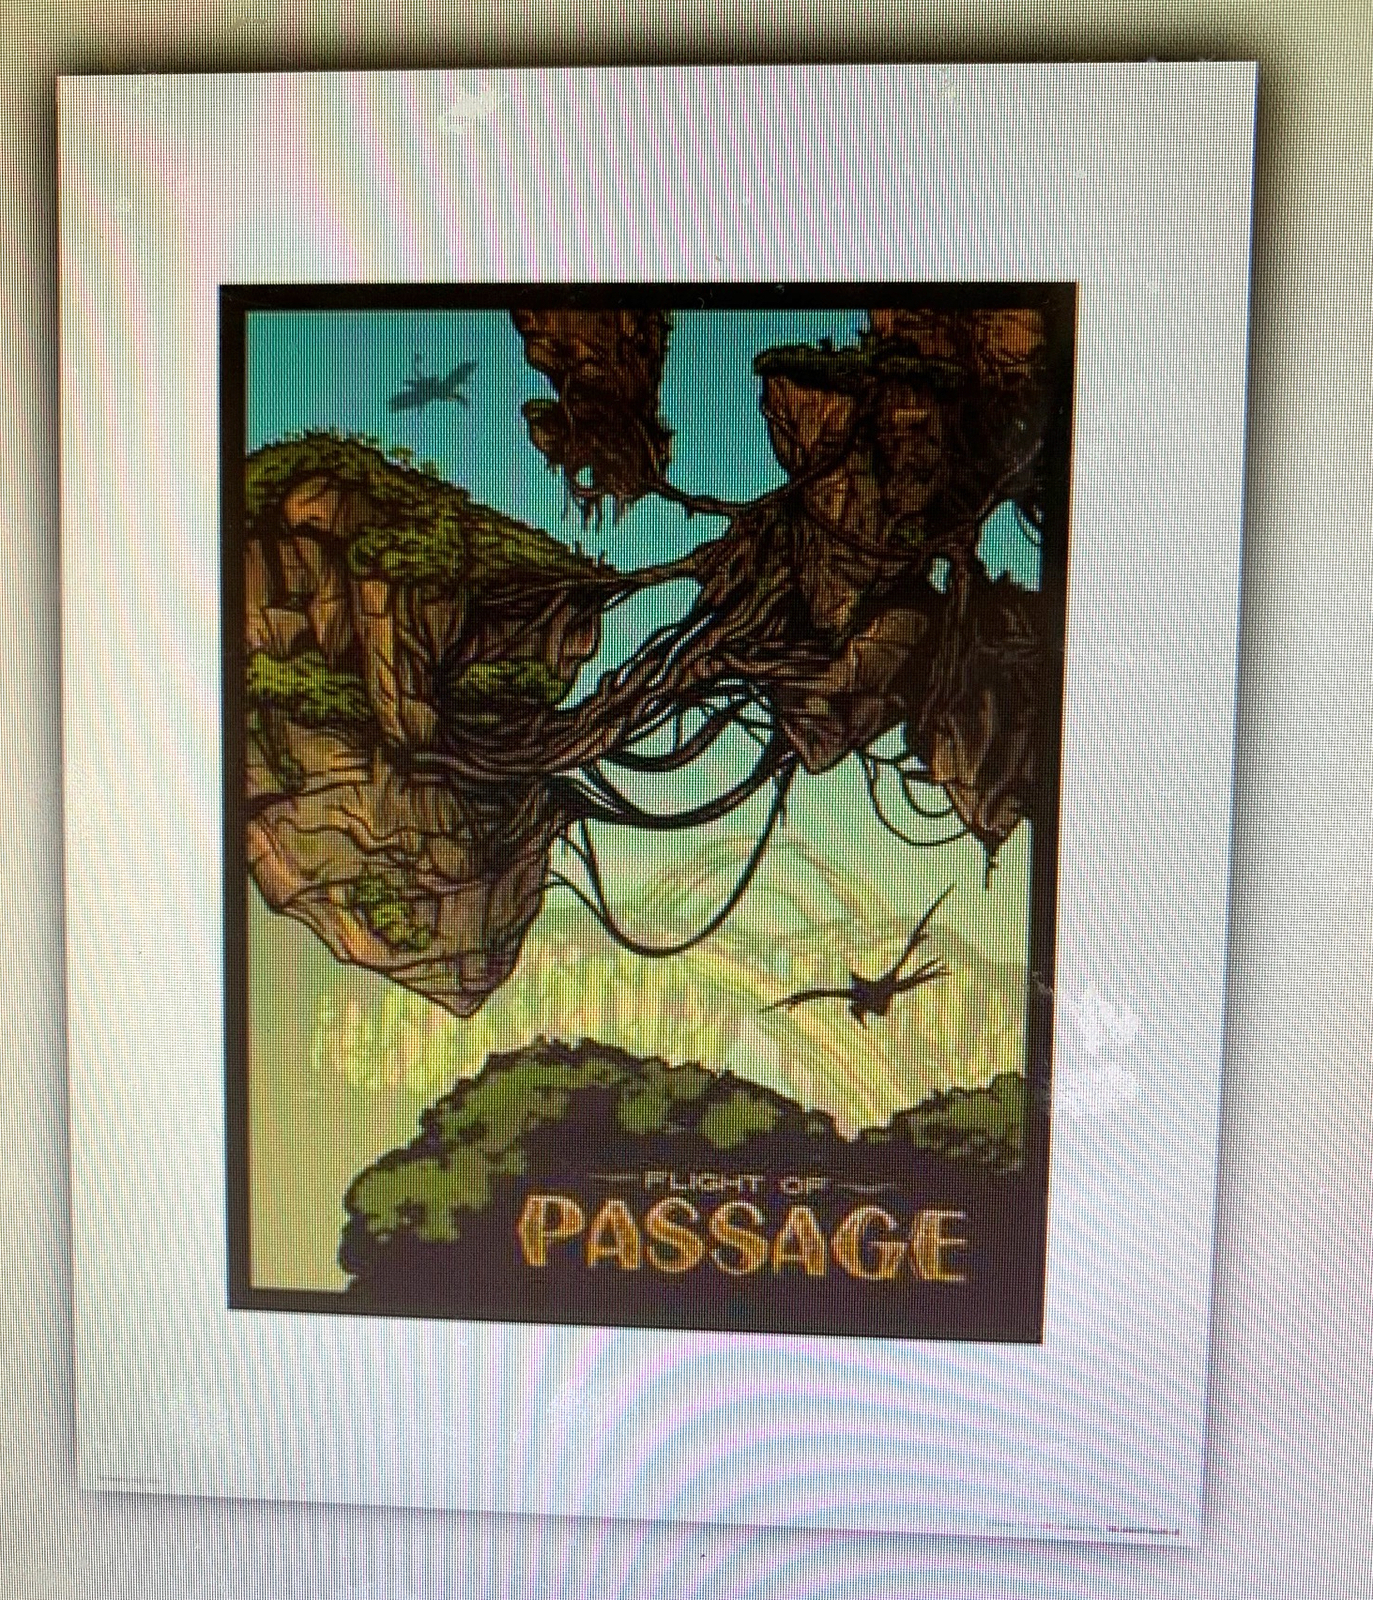 Disney Parks Flight of Passage Attraction Poster Art Print 16 x 20 More Sizes - $47.90